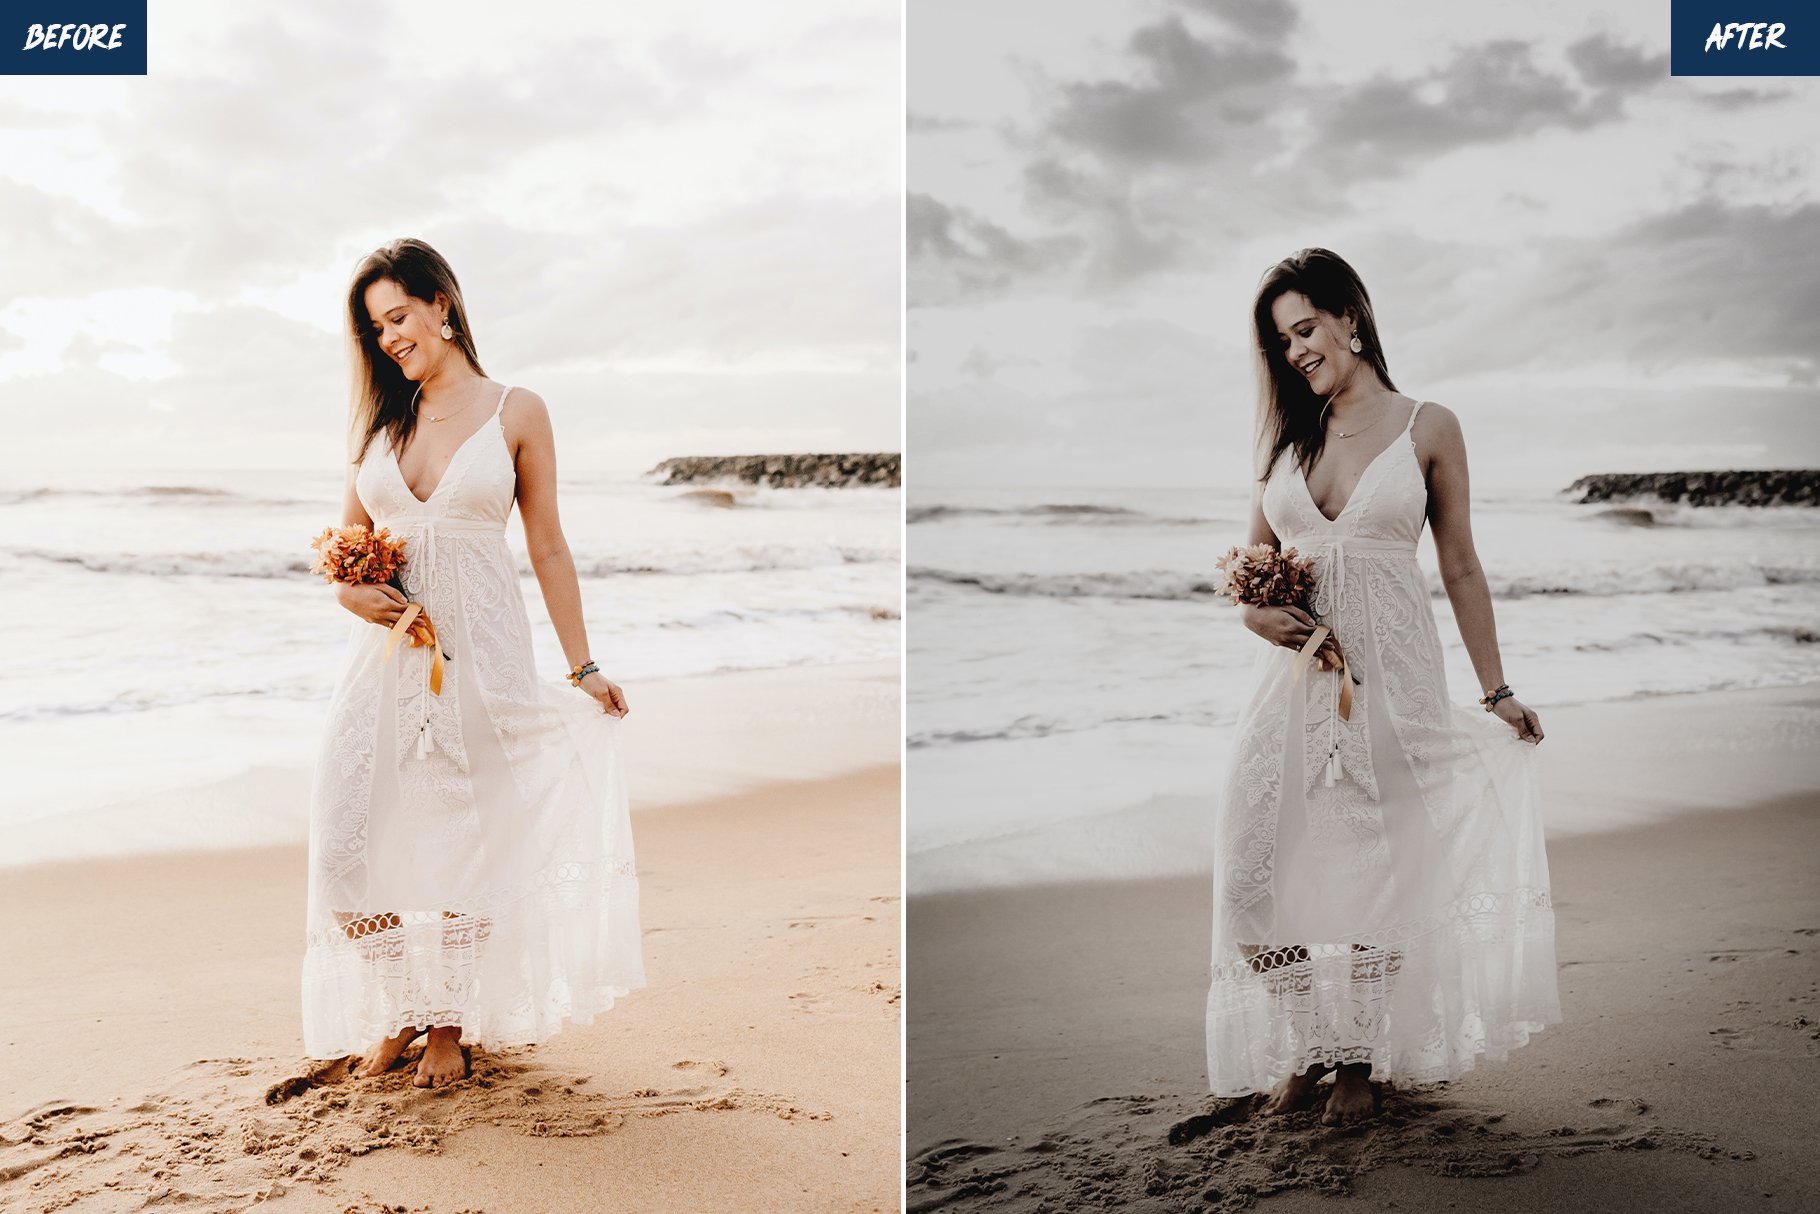 dark and moody wedding presets before and after 02 733